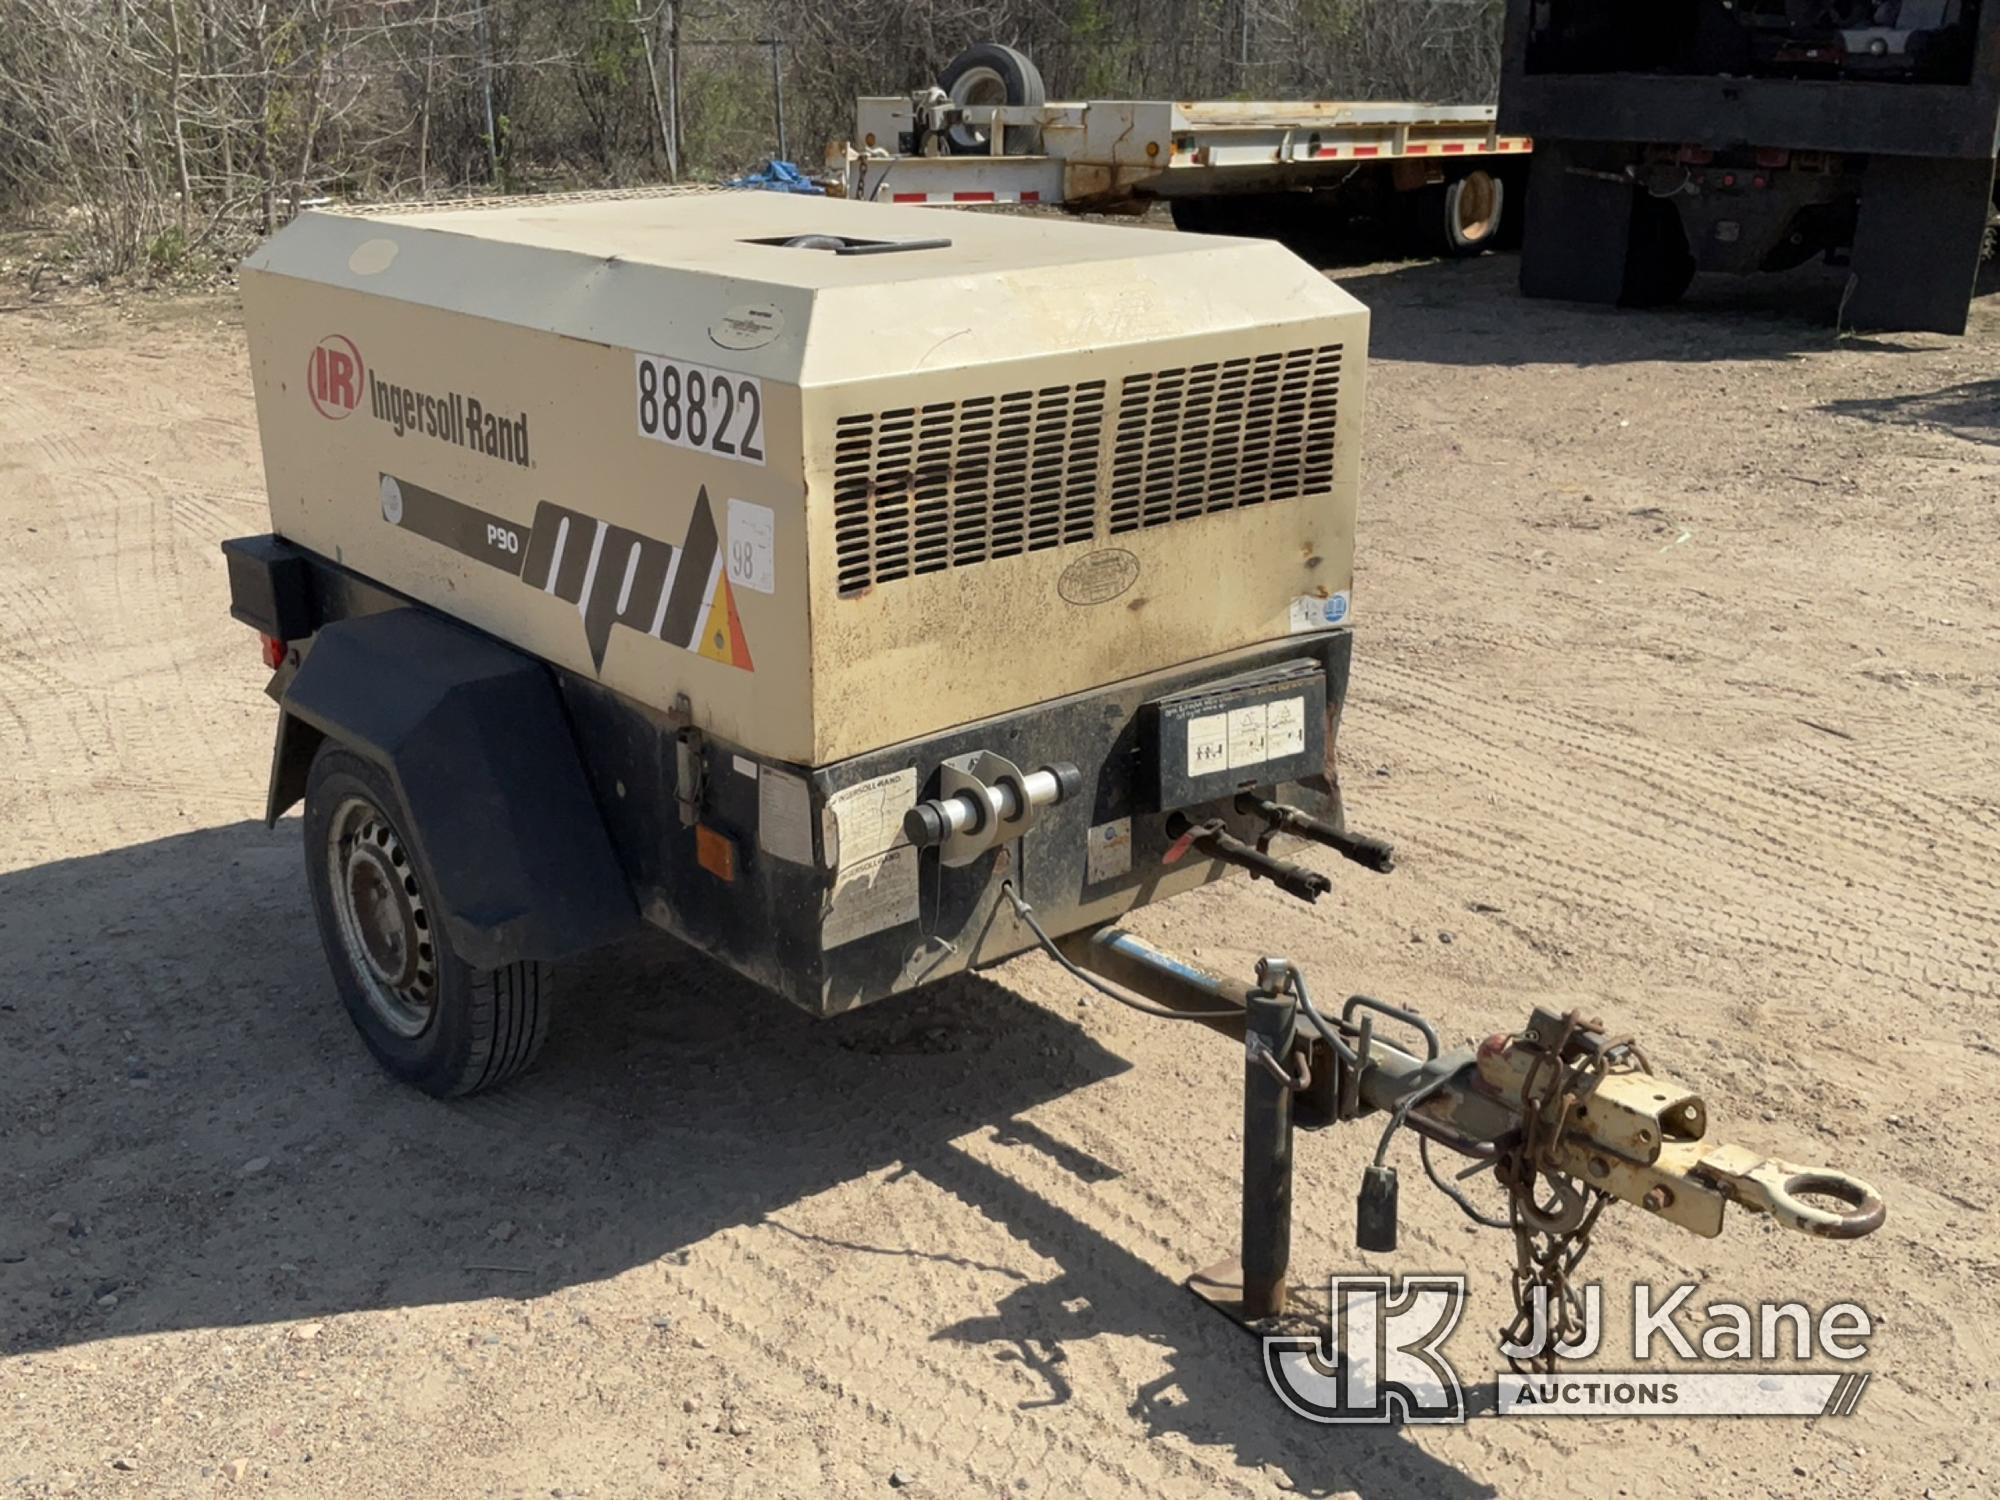 (Shakopee, MN) 2002 Ingersoll Rand P90 Portable Air Compressor, Trailer mounted No Title) (Blowing O